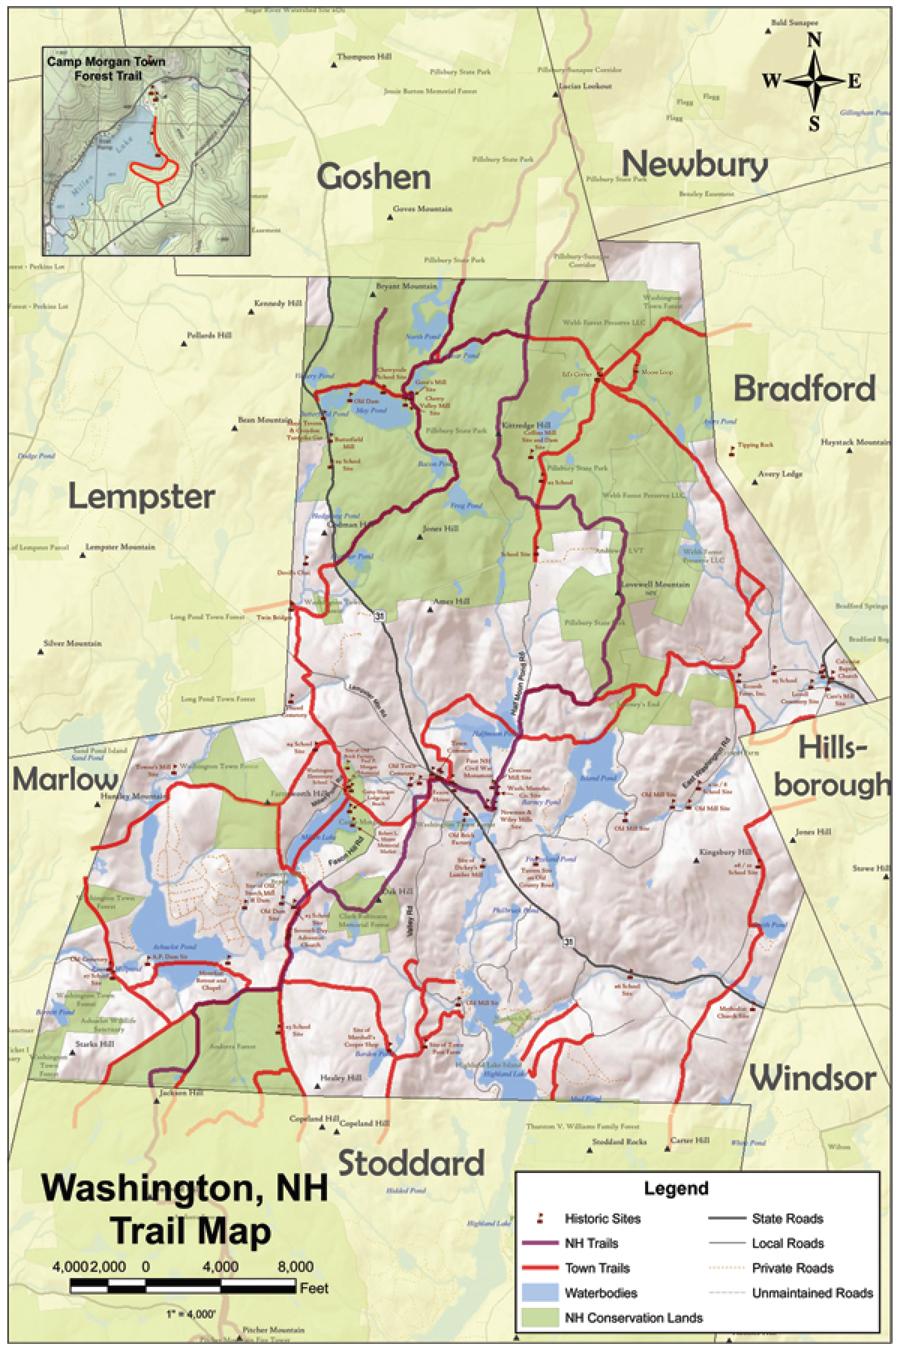 Town of Washington, New Hampshire Master Plan 2015 6. RECREATION Water Access: Numerous lakes and ponds in Washington provide opportunities for swimming, boating, paddling and fishing.